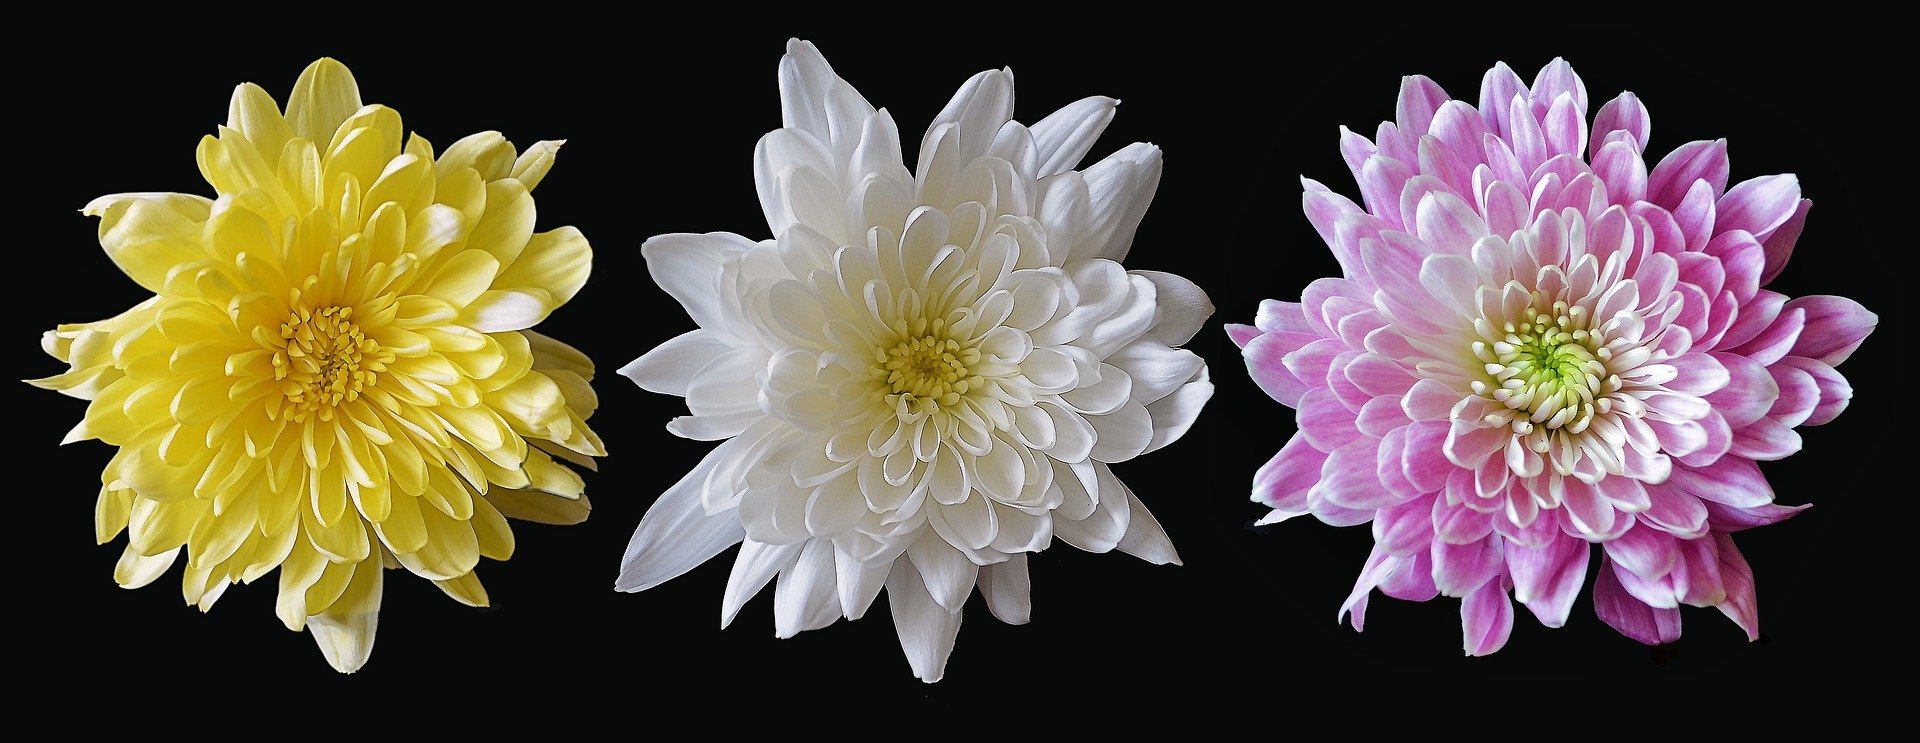 A yellow, white, and pink chrysanthemum | Photo: Pixabay/A Quinn